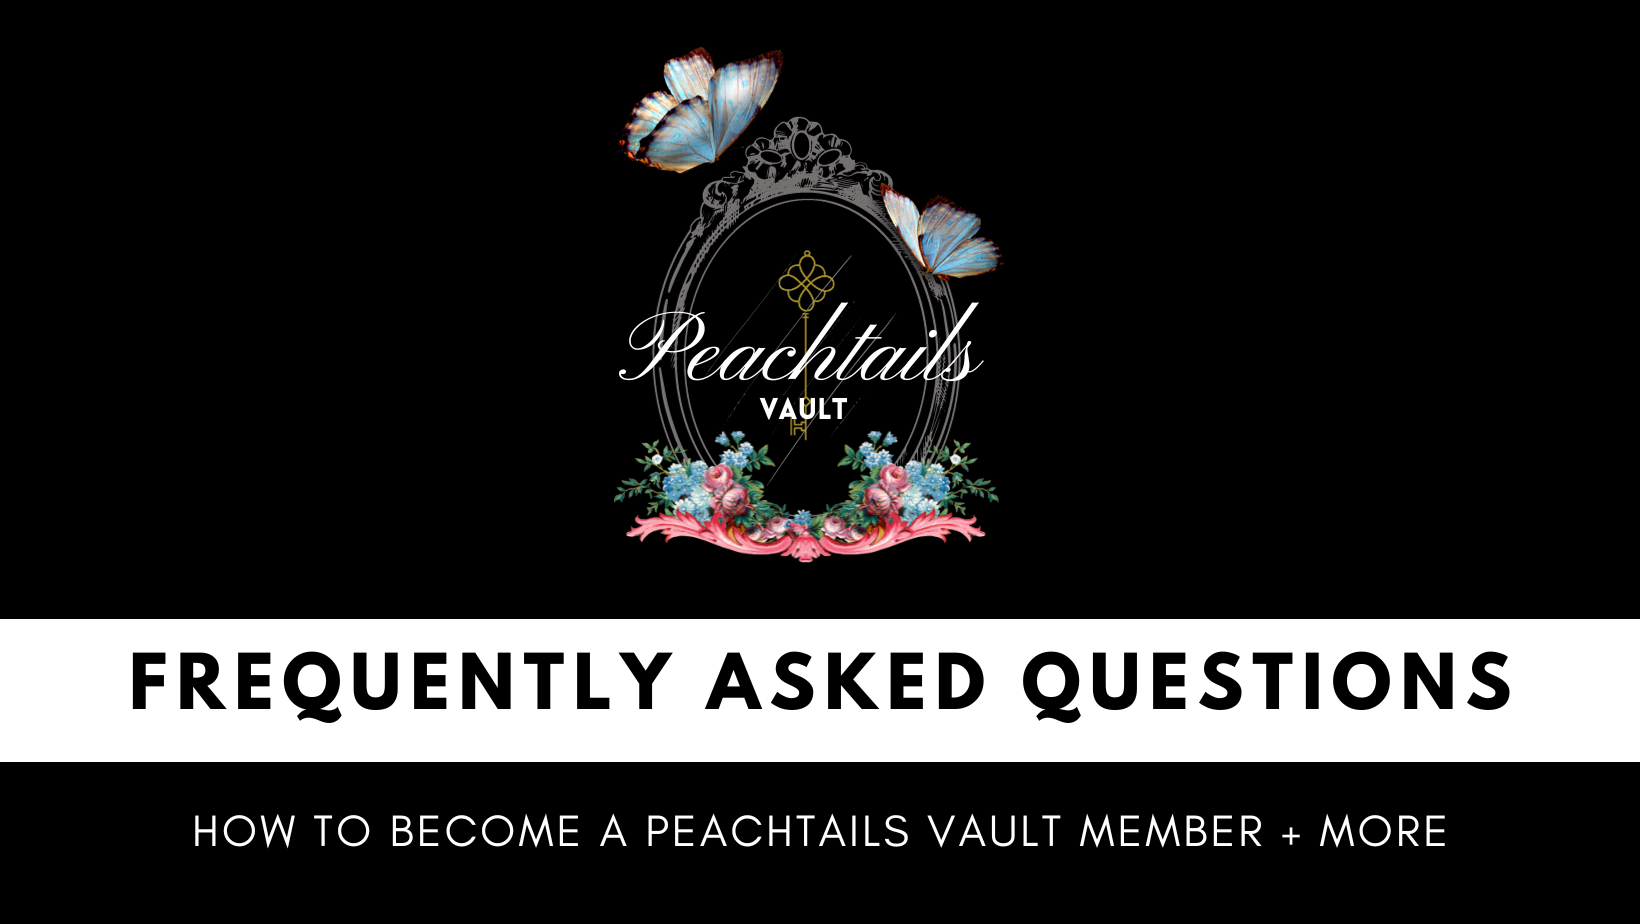 The image has a black background and features the "Peachtails VAULT" logo centered at the top, framed by an ornate oval with florals and butterflies. Below the logo, in large white letters, reads "FREQUENTLY ASKED QUESTIONS," and beneath in a smaller font, "HOW TO BECOME A PEACHTAILS VAULT MEMBER + MORE." The design suggests an informational section, related to Peachtails vault membership details.